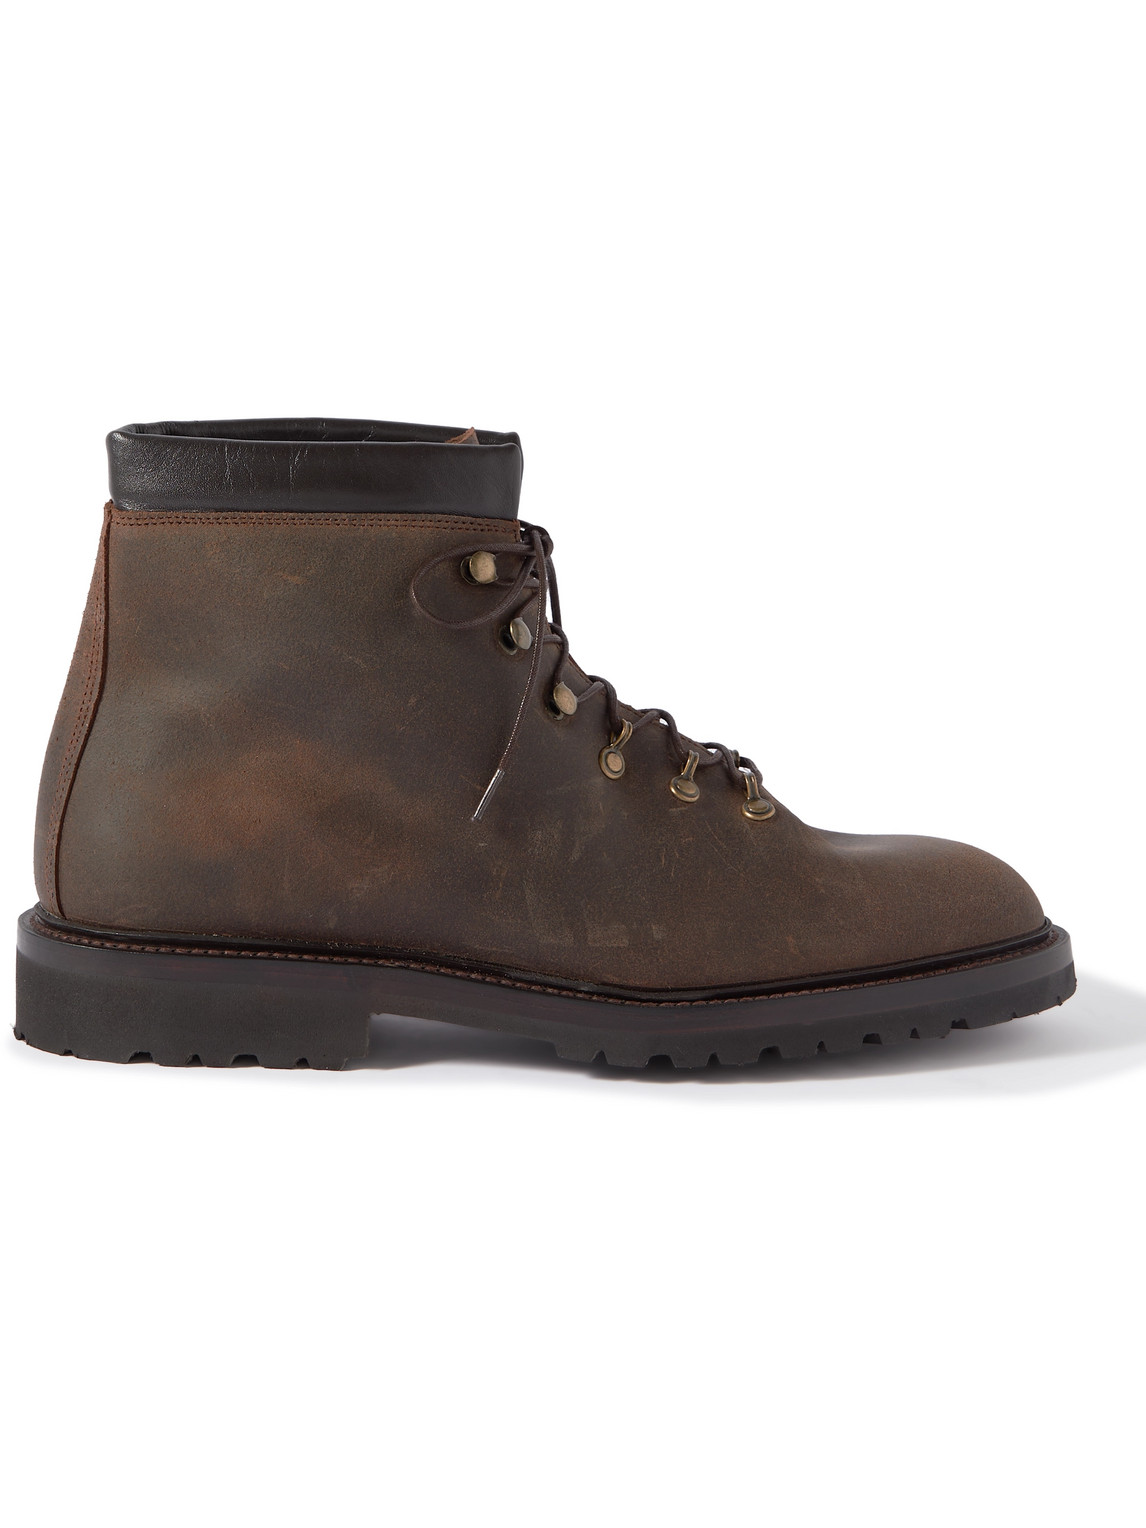 George Cleverley - Ernest Shearling-Lined Waxed Roughout Suede Hiking Boots - Men - Brown - UK 7.5 von George Cleverley